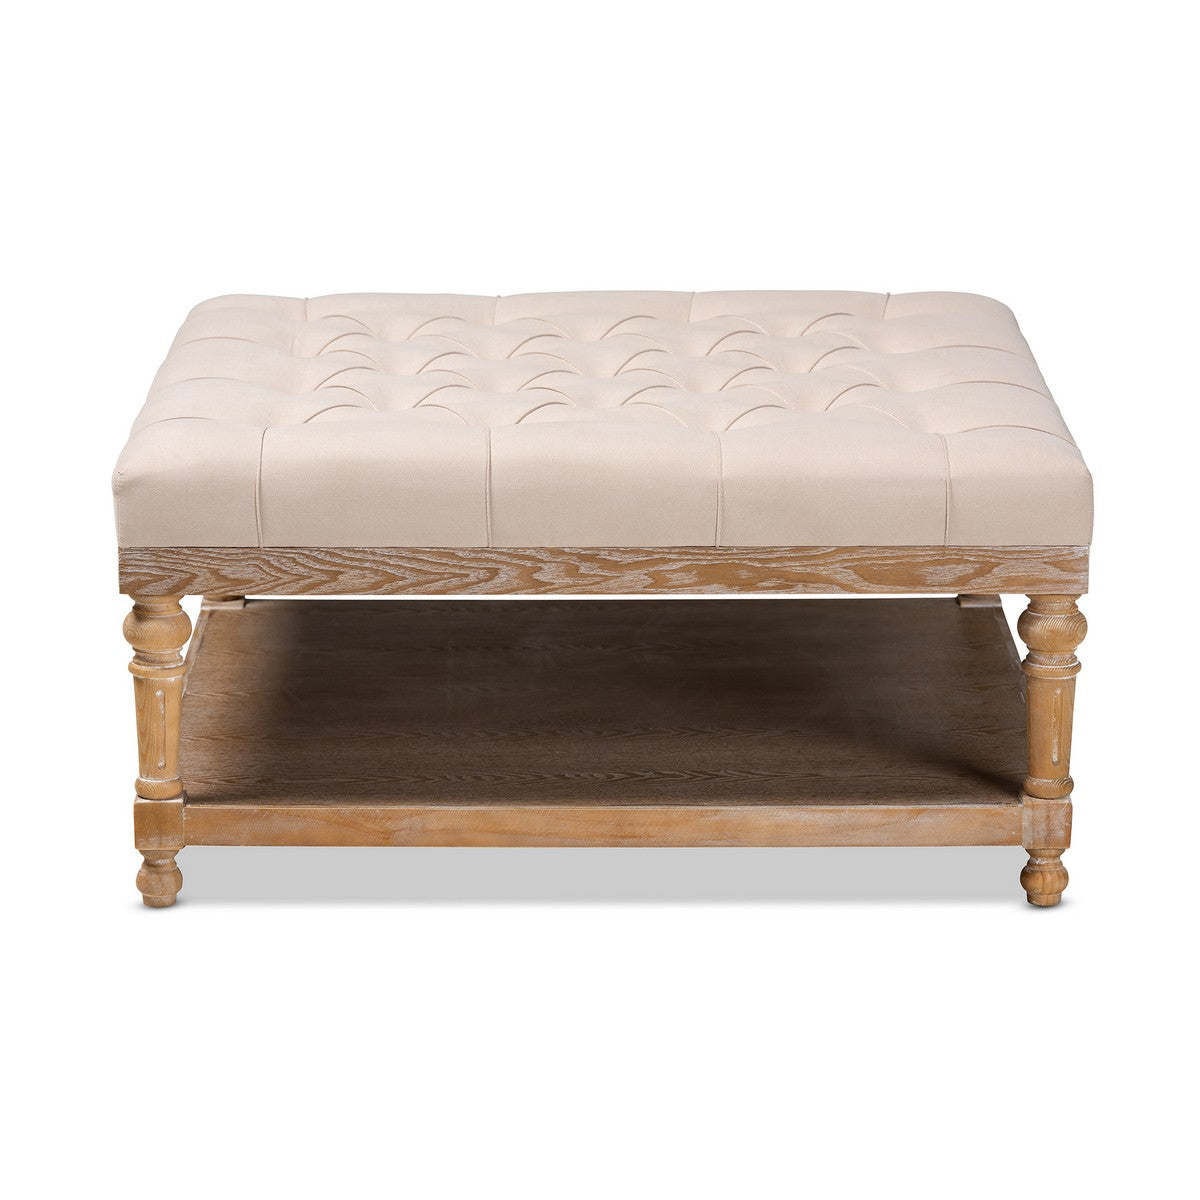 Baxton Studio Kelly Modern and Rustic Beige Linen Fabric Upholstered and Greywashed Wood Cocktail Ottoman